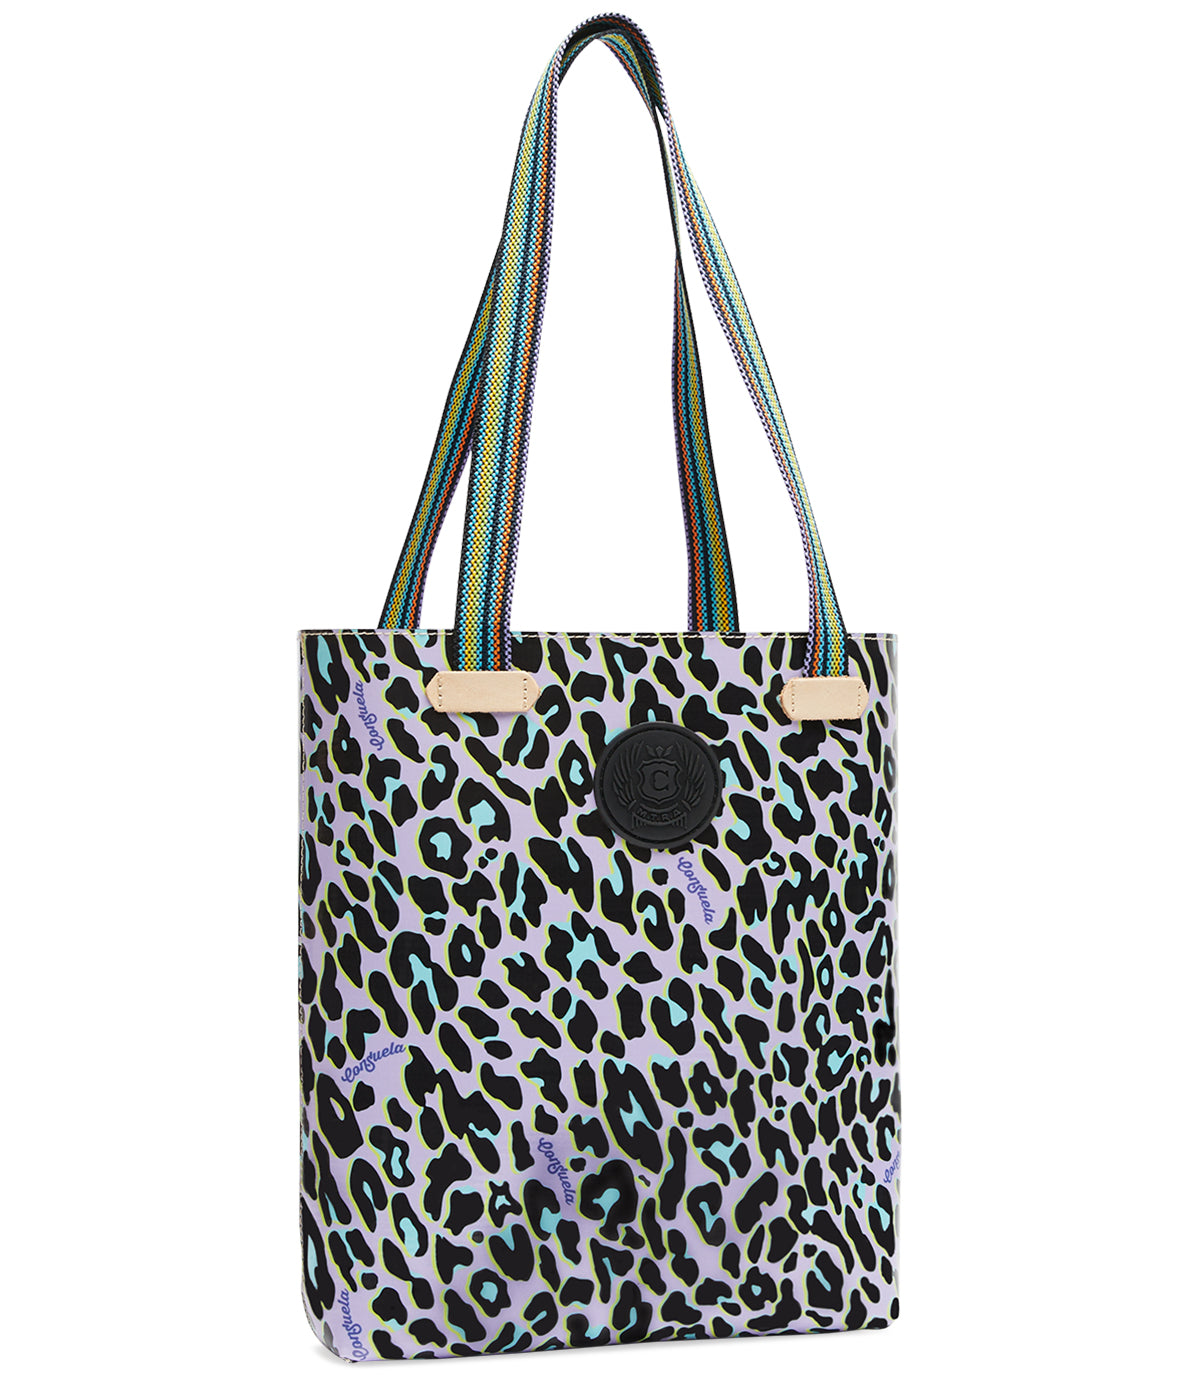 DEE DEE EVERYDAY TOTE – The Haskell Drug Store